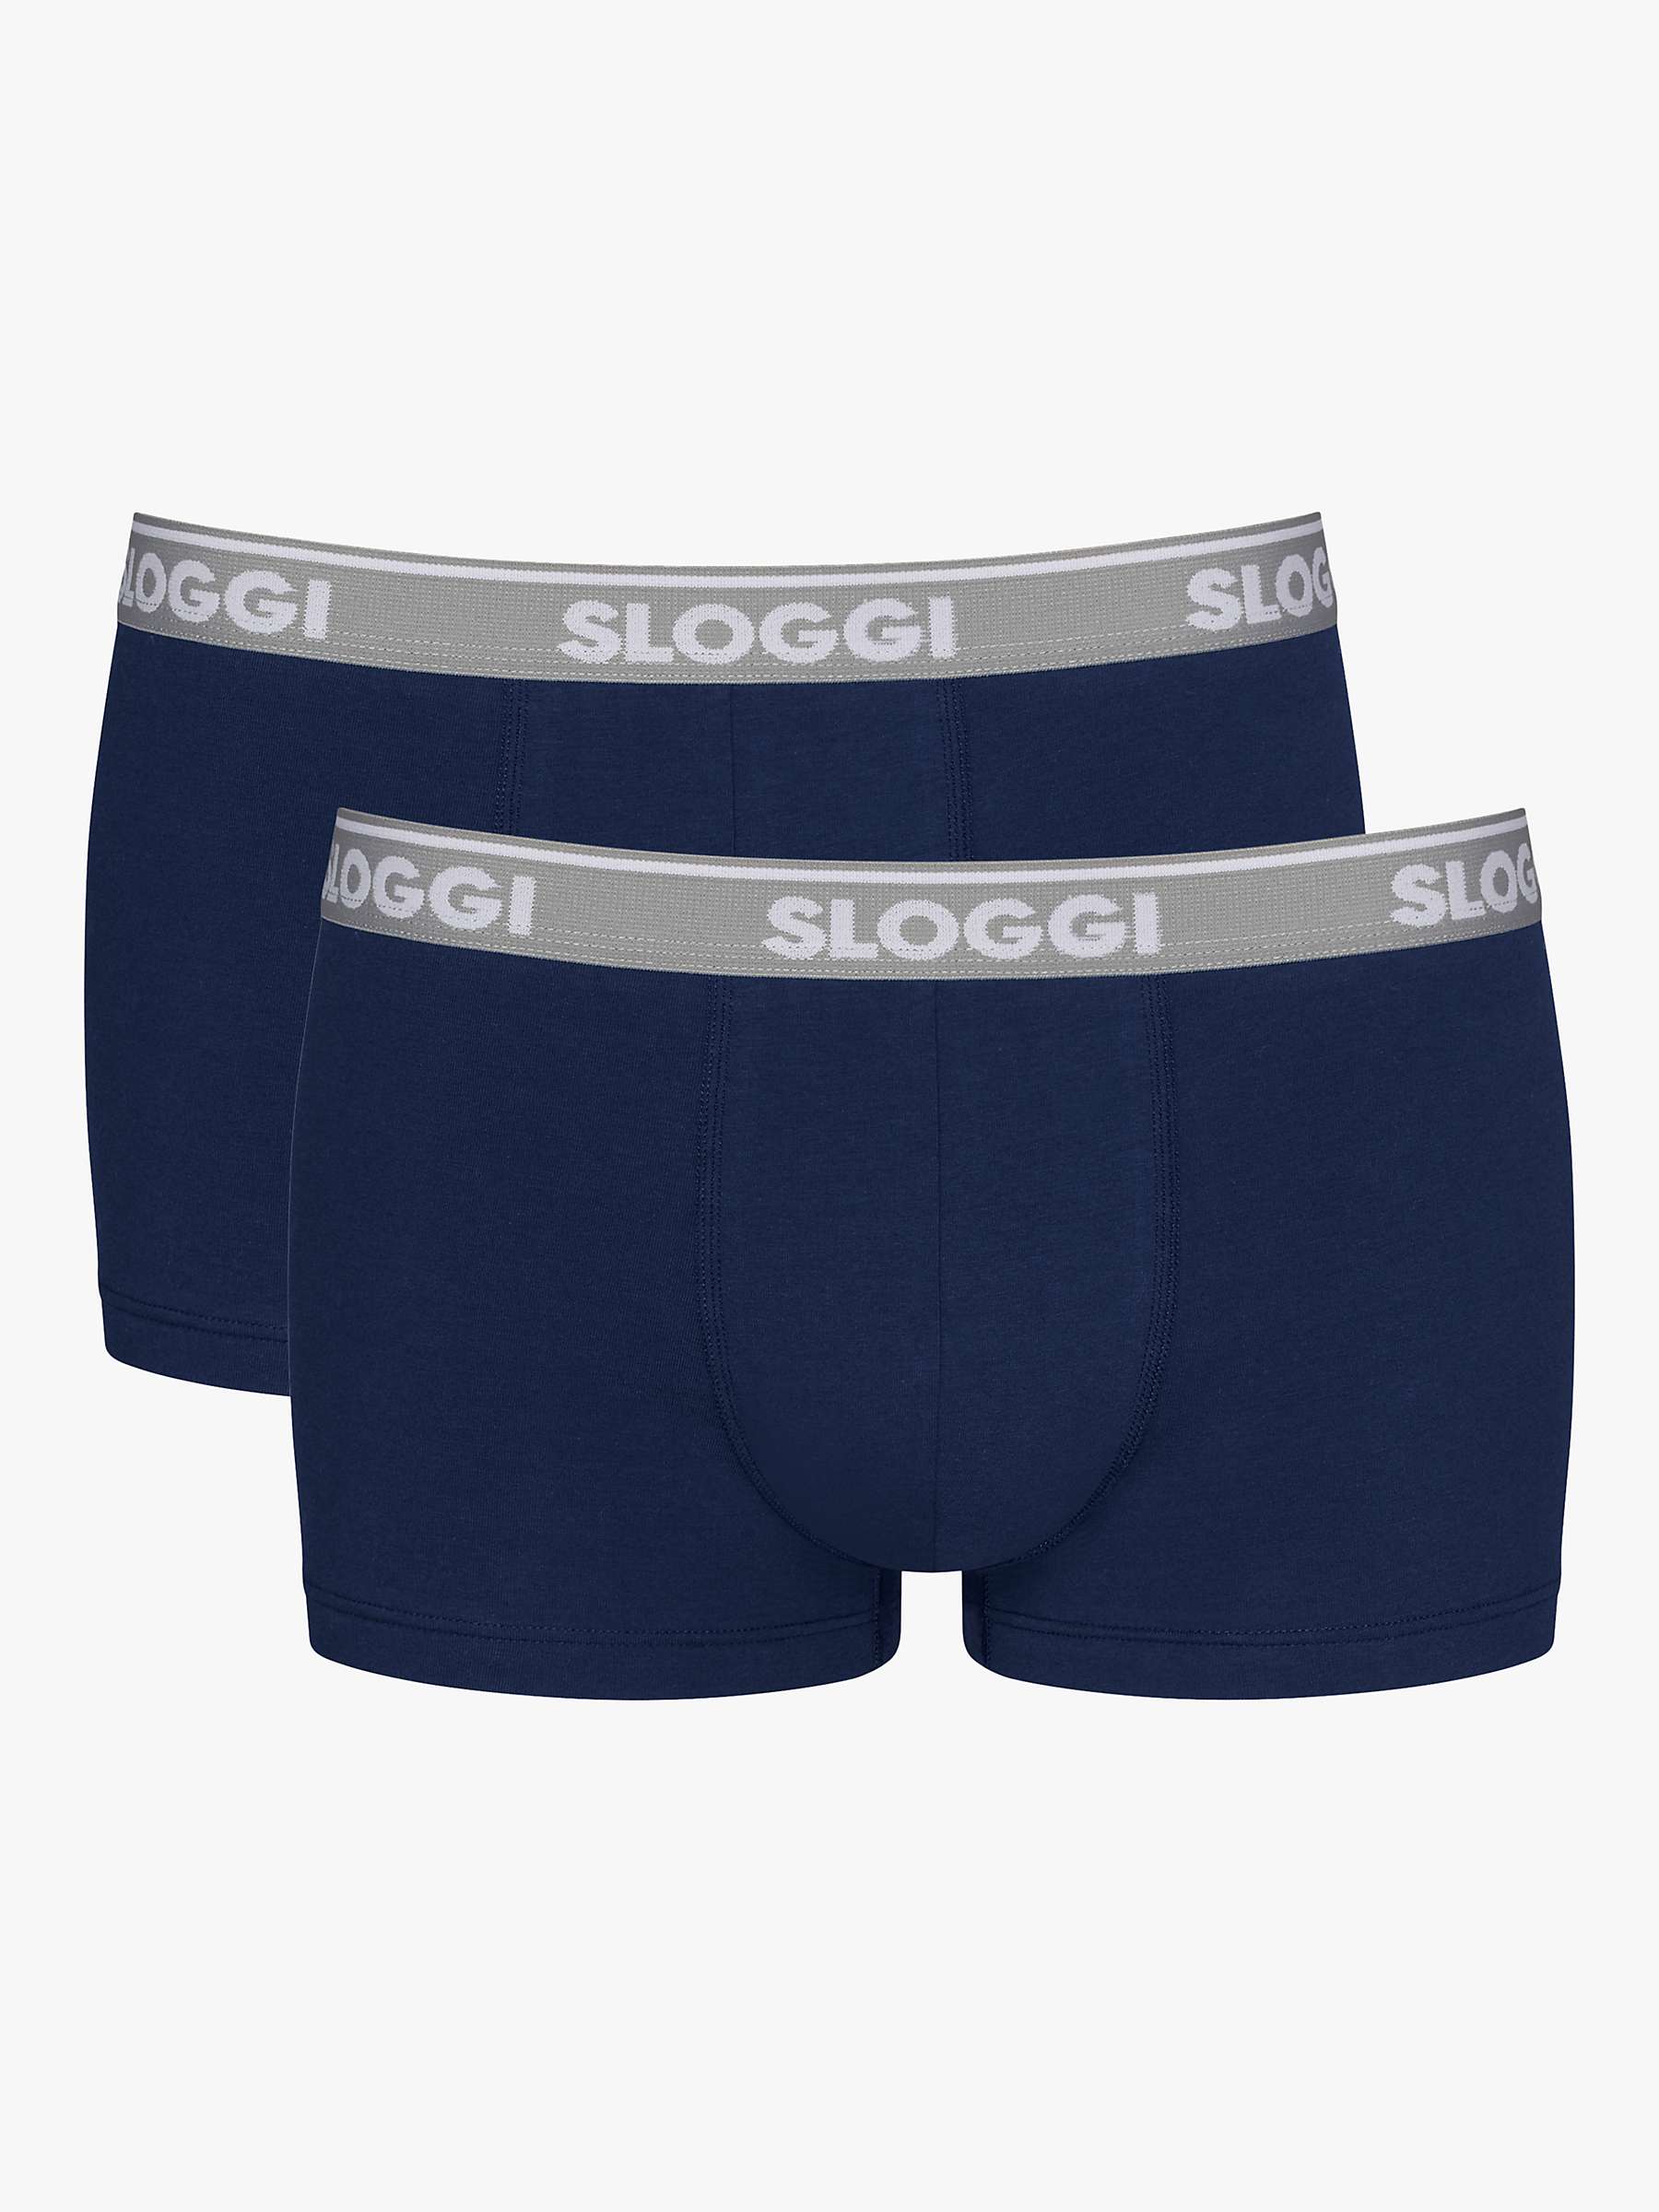 Buy sloggi GO ABC Cotton Stretch Hipster Trunks, Pack of 2, Grey Online at johnlewis.com